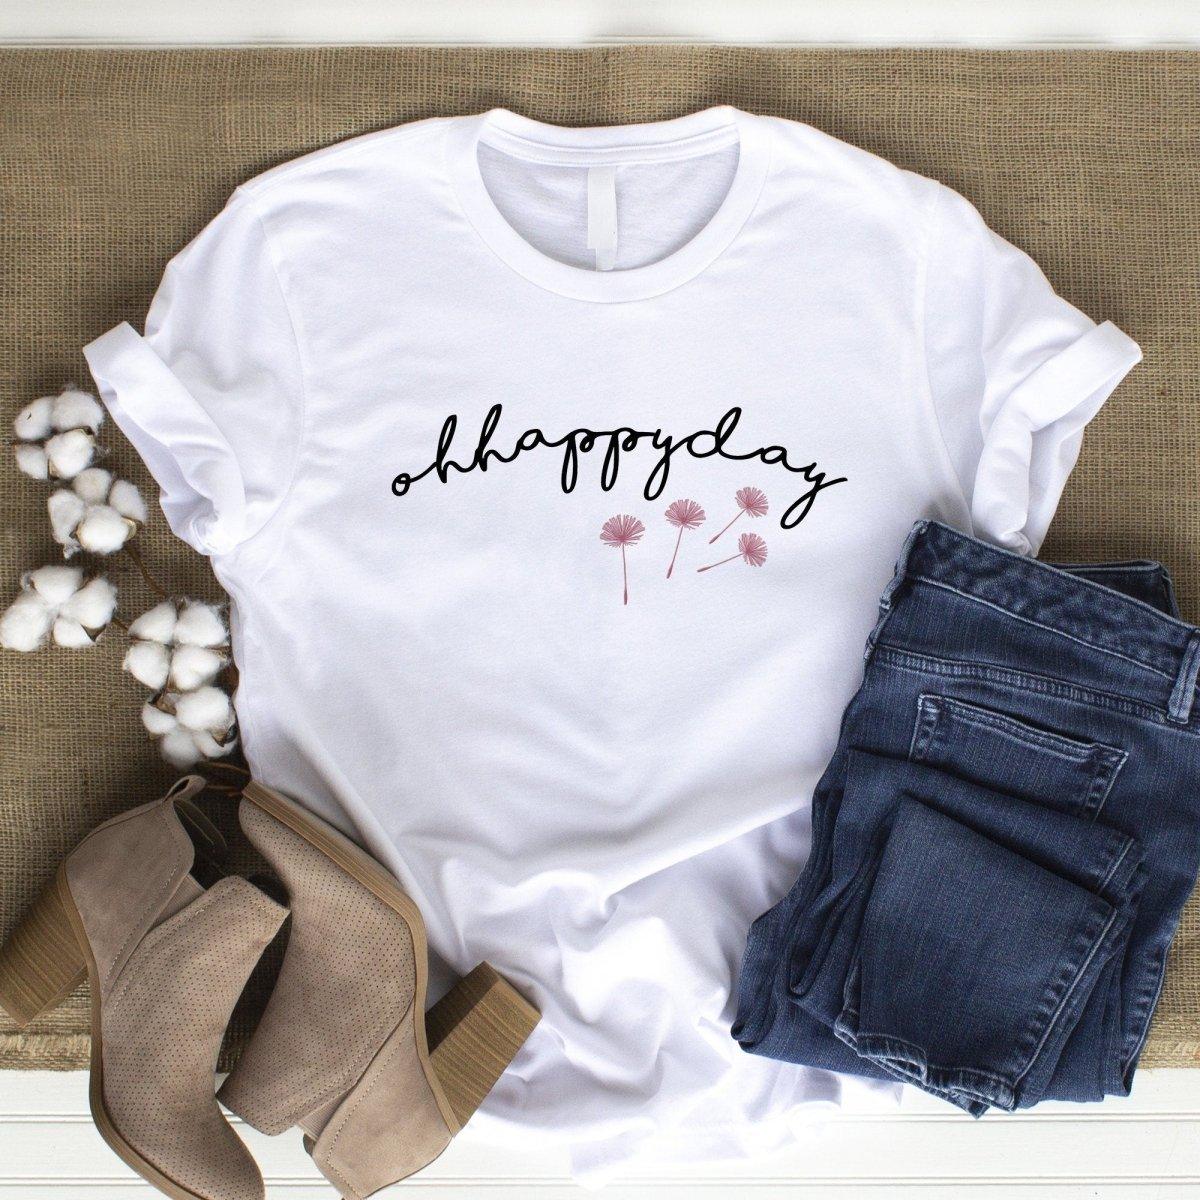 Happy Day T-shirt, Casual T-shirt, White Slogan Girls Tops, Women&#39;s Slogan Top, Teenager Tops, Fashion Tops, Teen, Happy Top, Positive Top - Amy Lucy